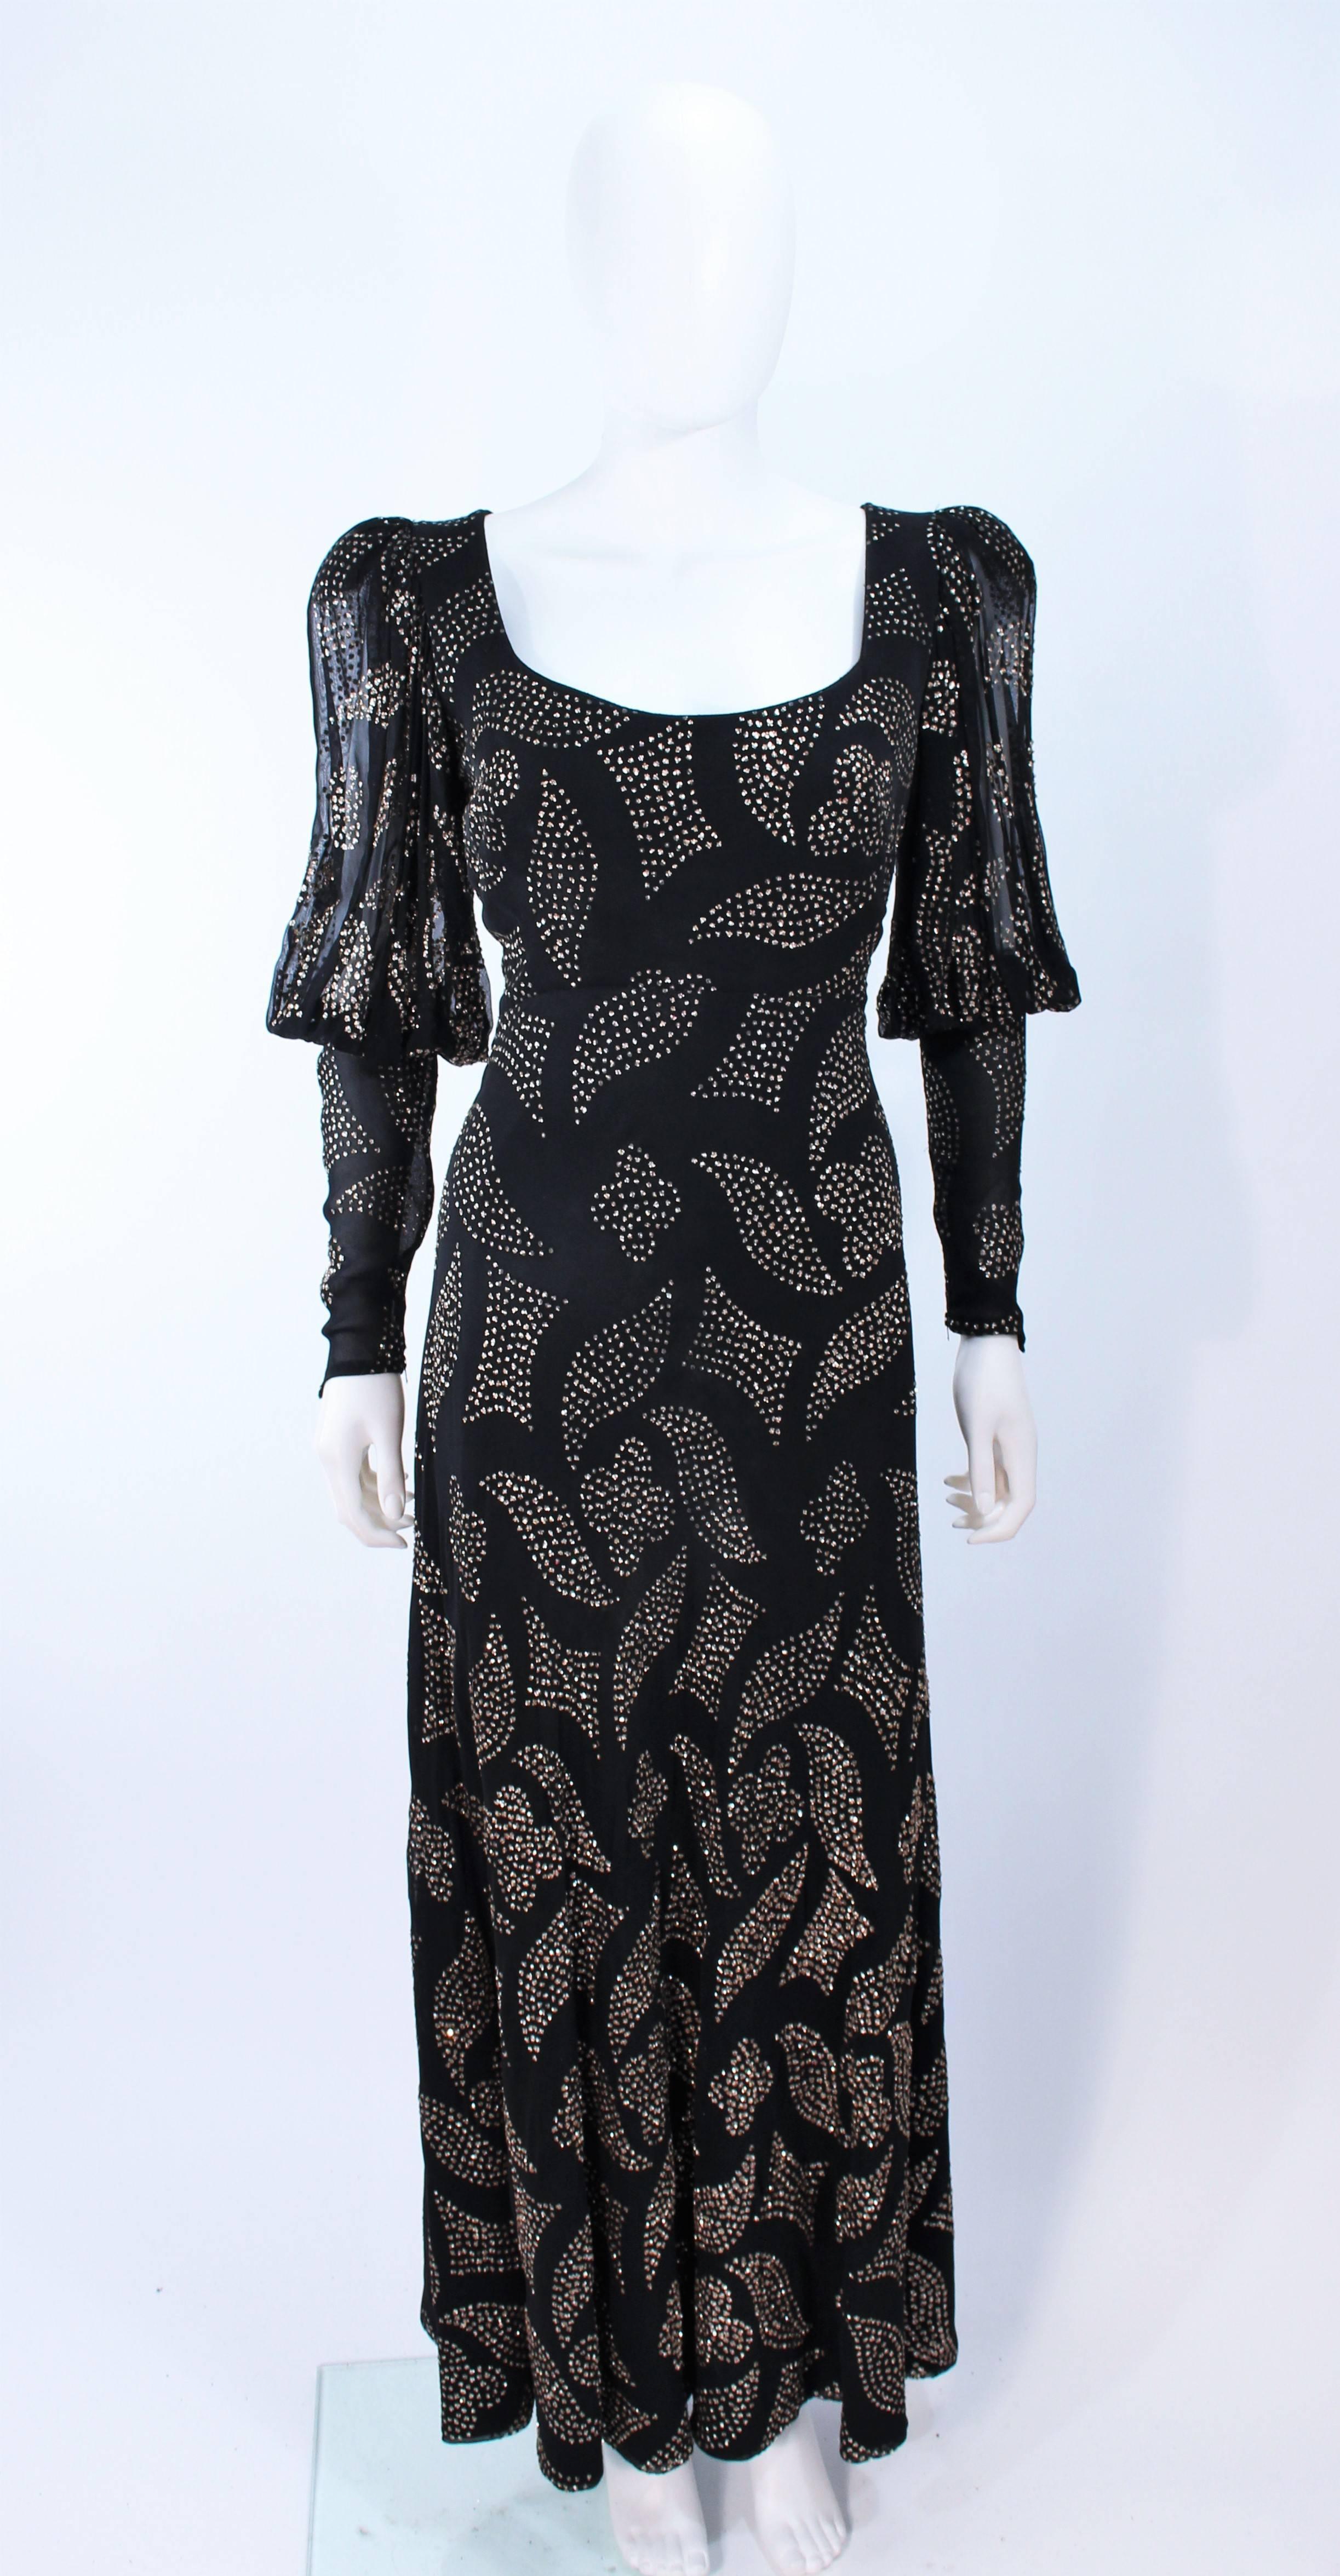 This Pauline Trigere gown is composed of a crepe silk with patterned sequin applique. Features full sheer sleeves and zippered cuffs. There is a center back zipper closure. In excellent vintage condition, there is some slight discoloration due to